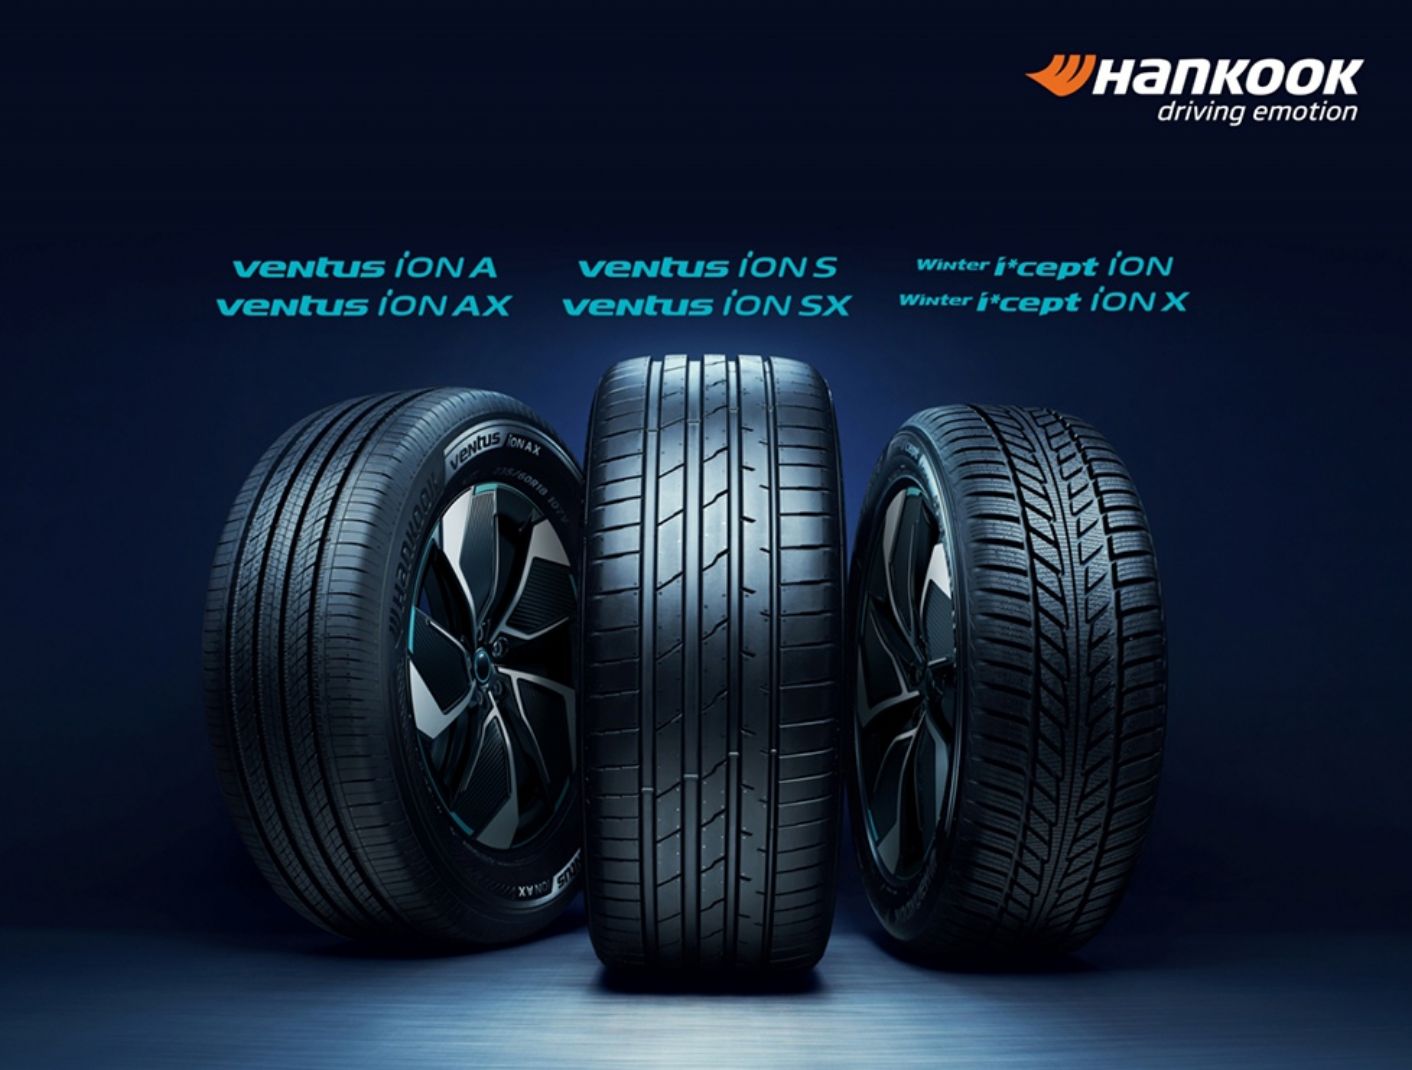 Hankook iON: new global family of tires for electric vehicles promote sustainable mobility